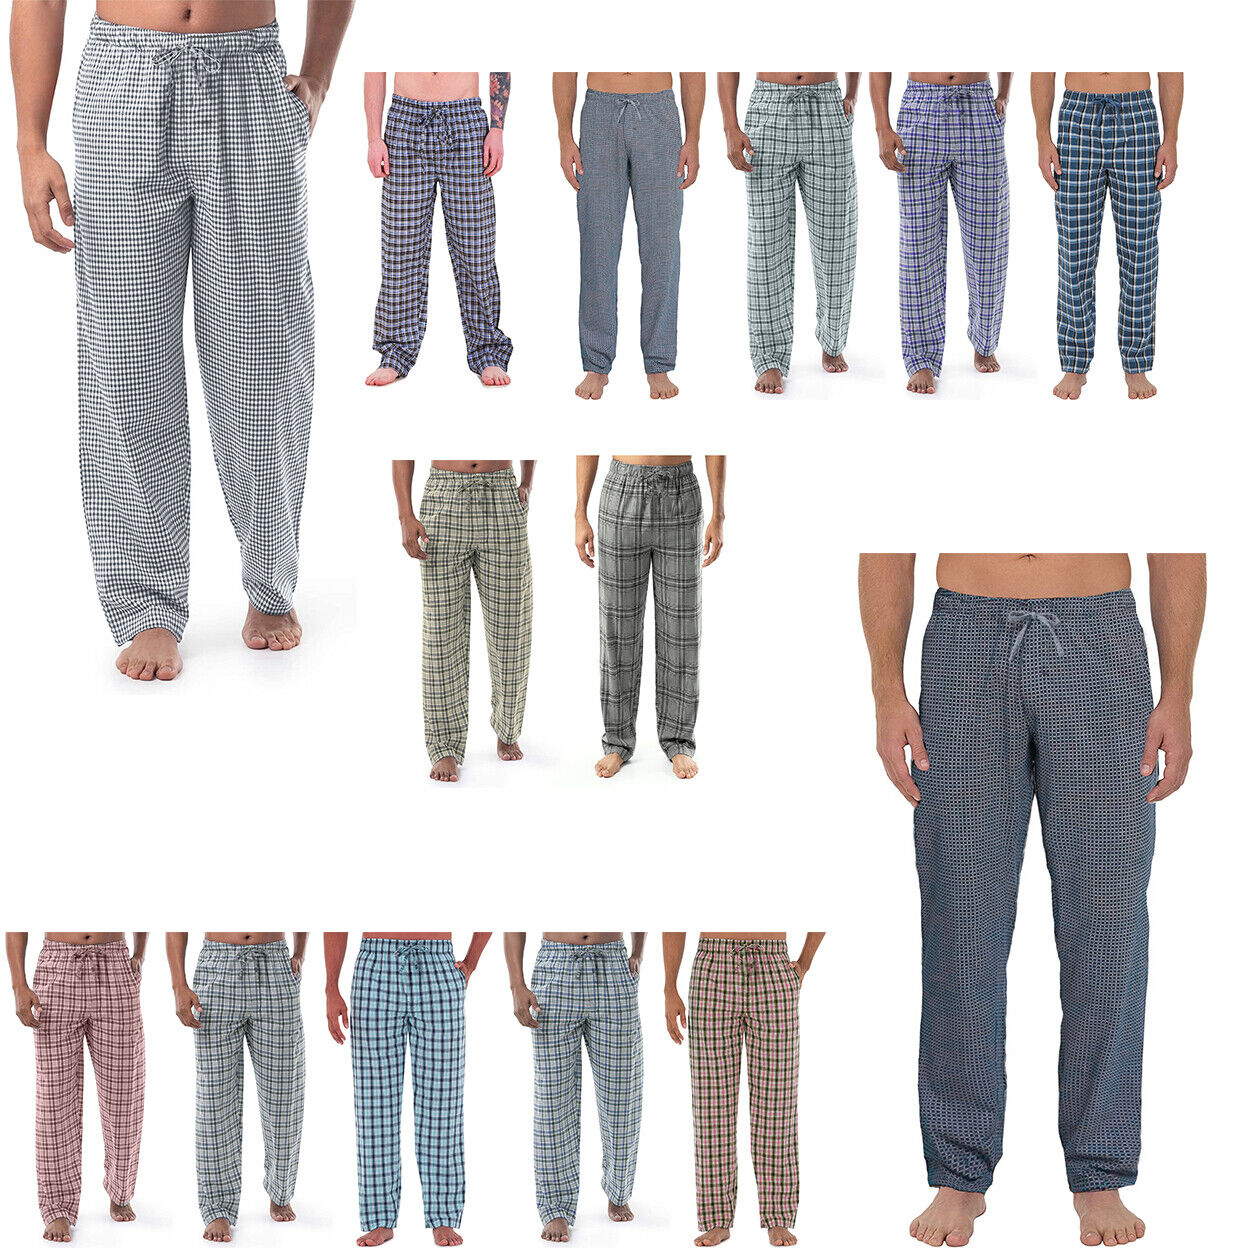 3-Pack: Men's Ultra-Soft Solid & Plaid Cotton Jersey Knit Comfy Sleep Lounge Pajama Pants - Solid, Large